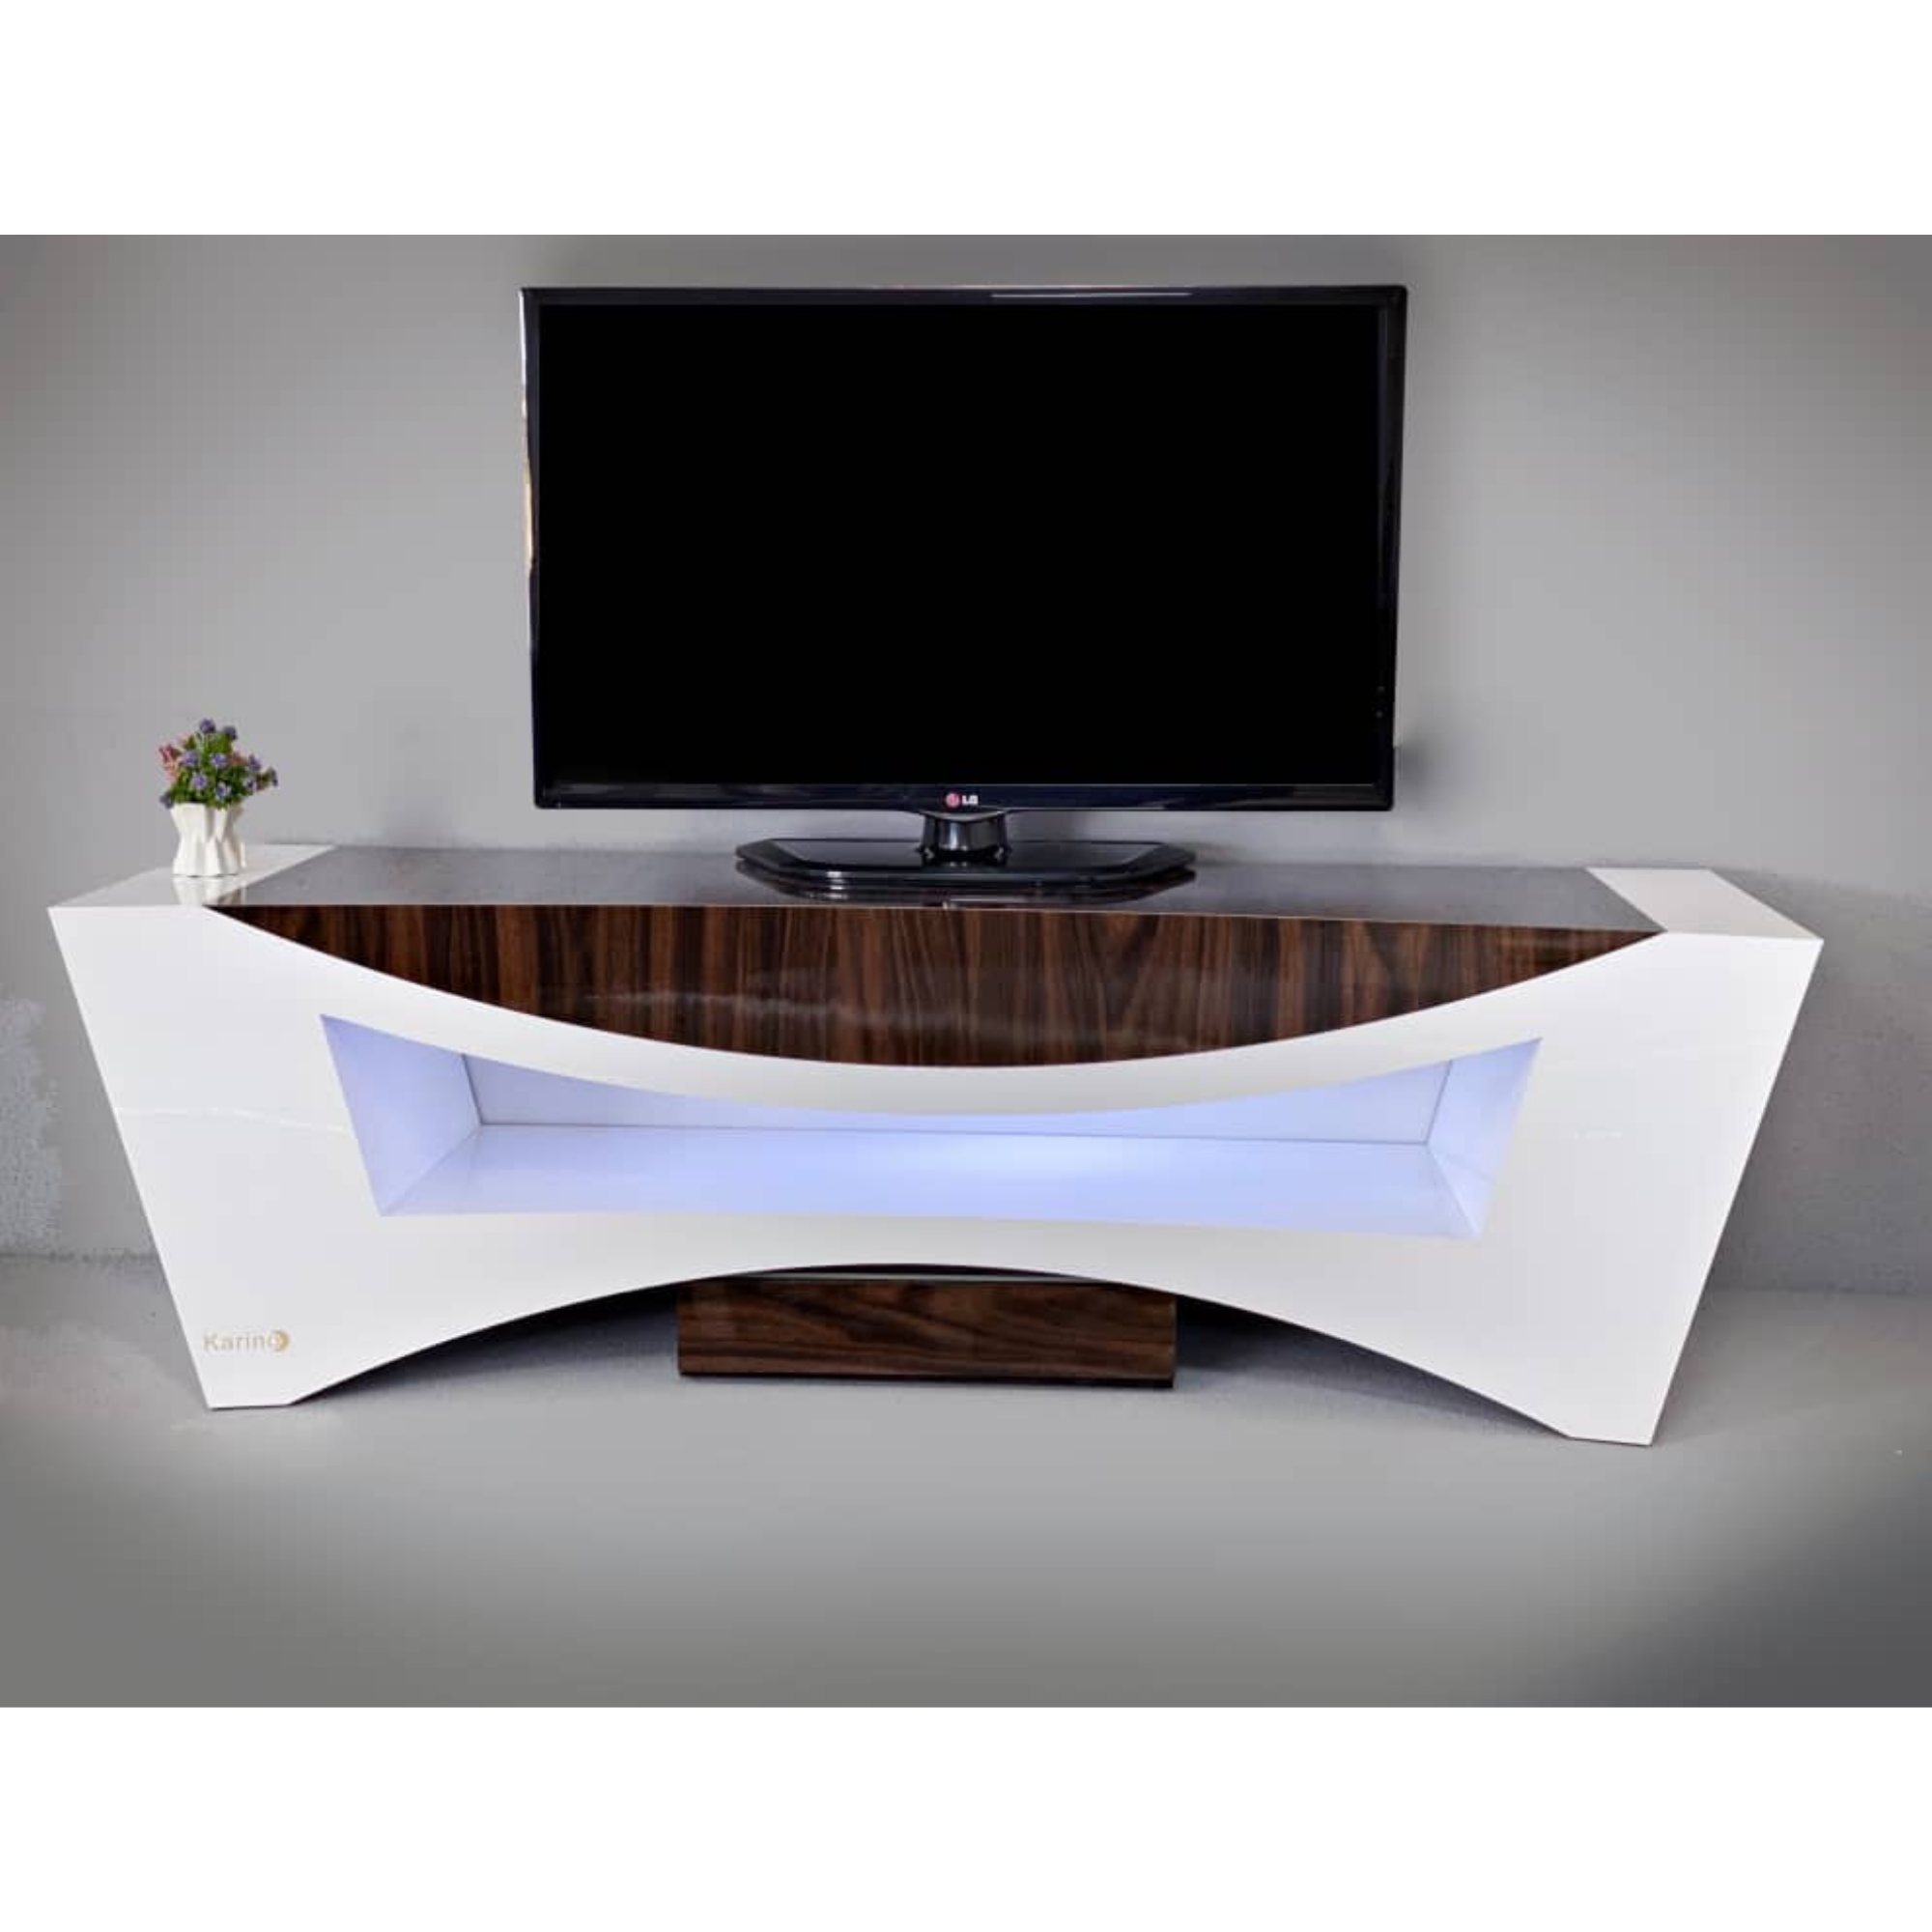 Fully Assembled, TV Stand, TV Unit, TV Console, Mid-Century Modern Entertainment Centre for Flat Screen TV, Cable Box, Gaming Consoles, in Living Room